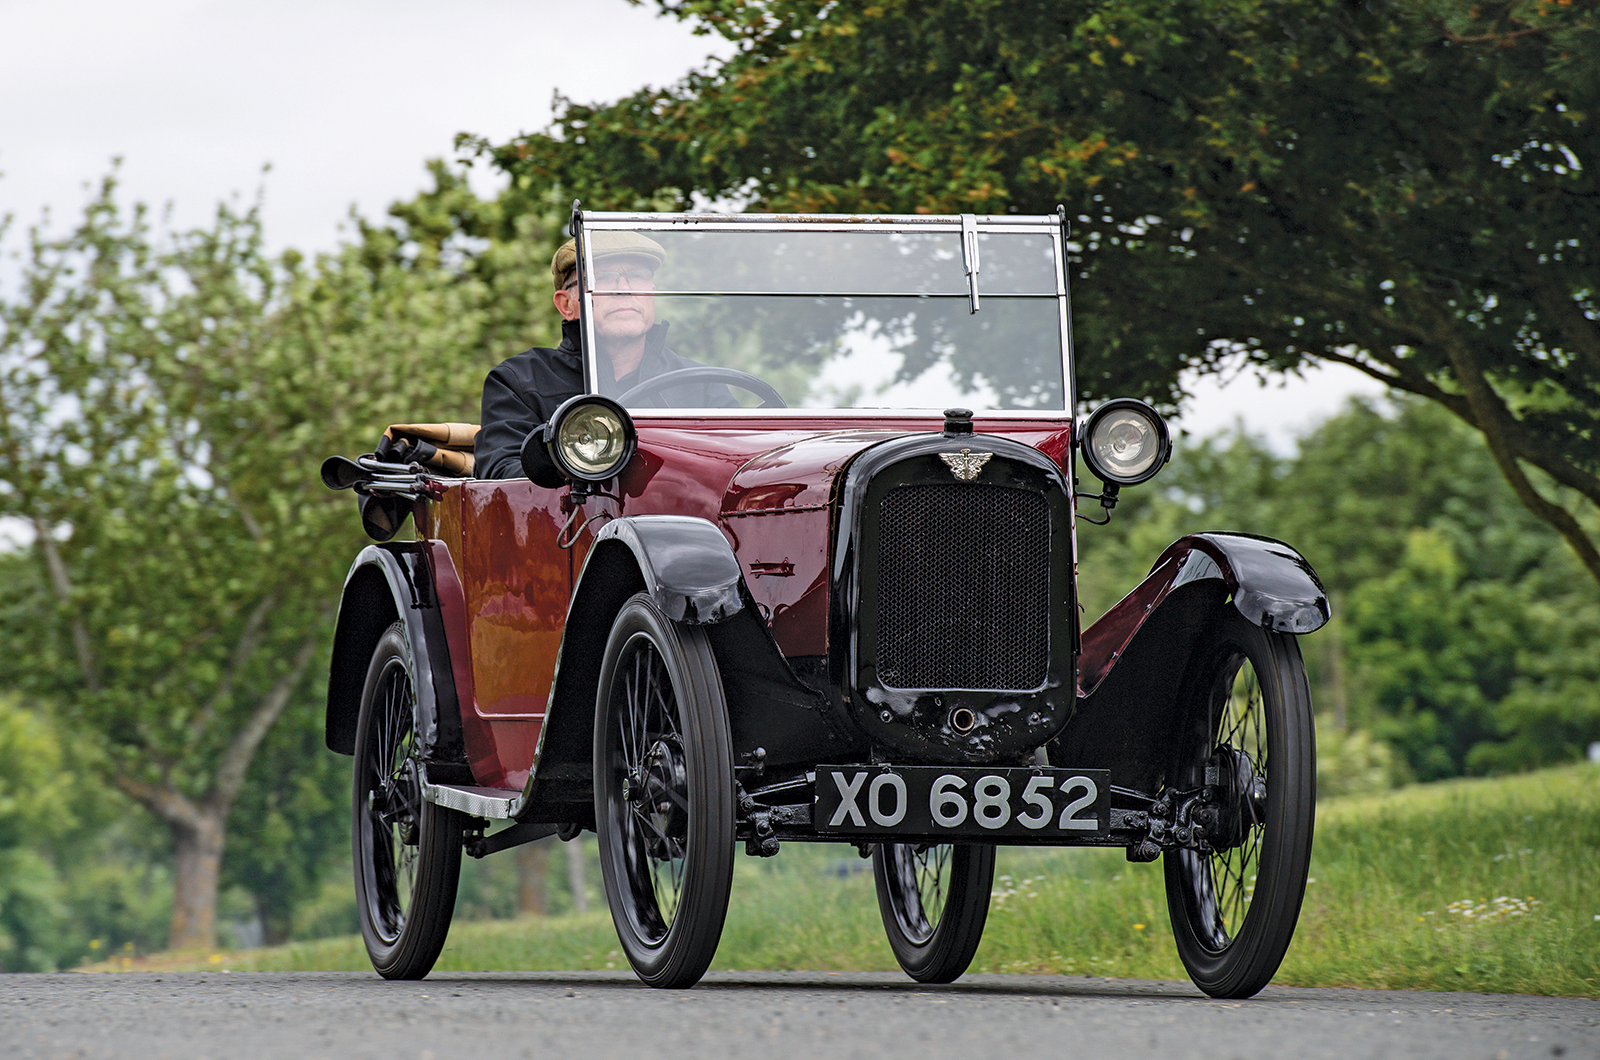 The story of the Austin 7 - the little car that hooked Britain on